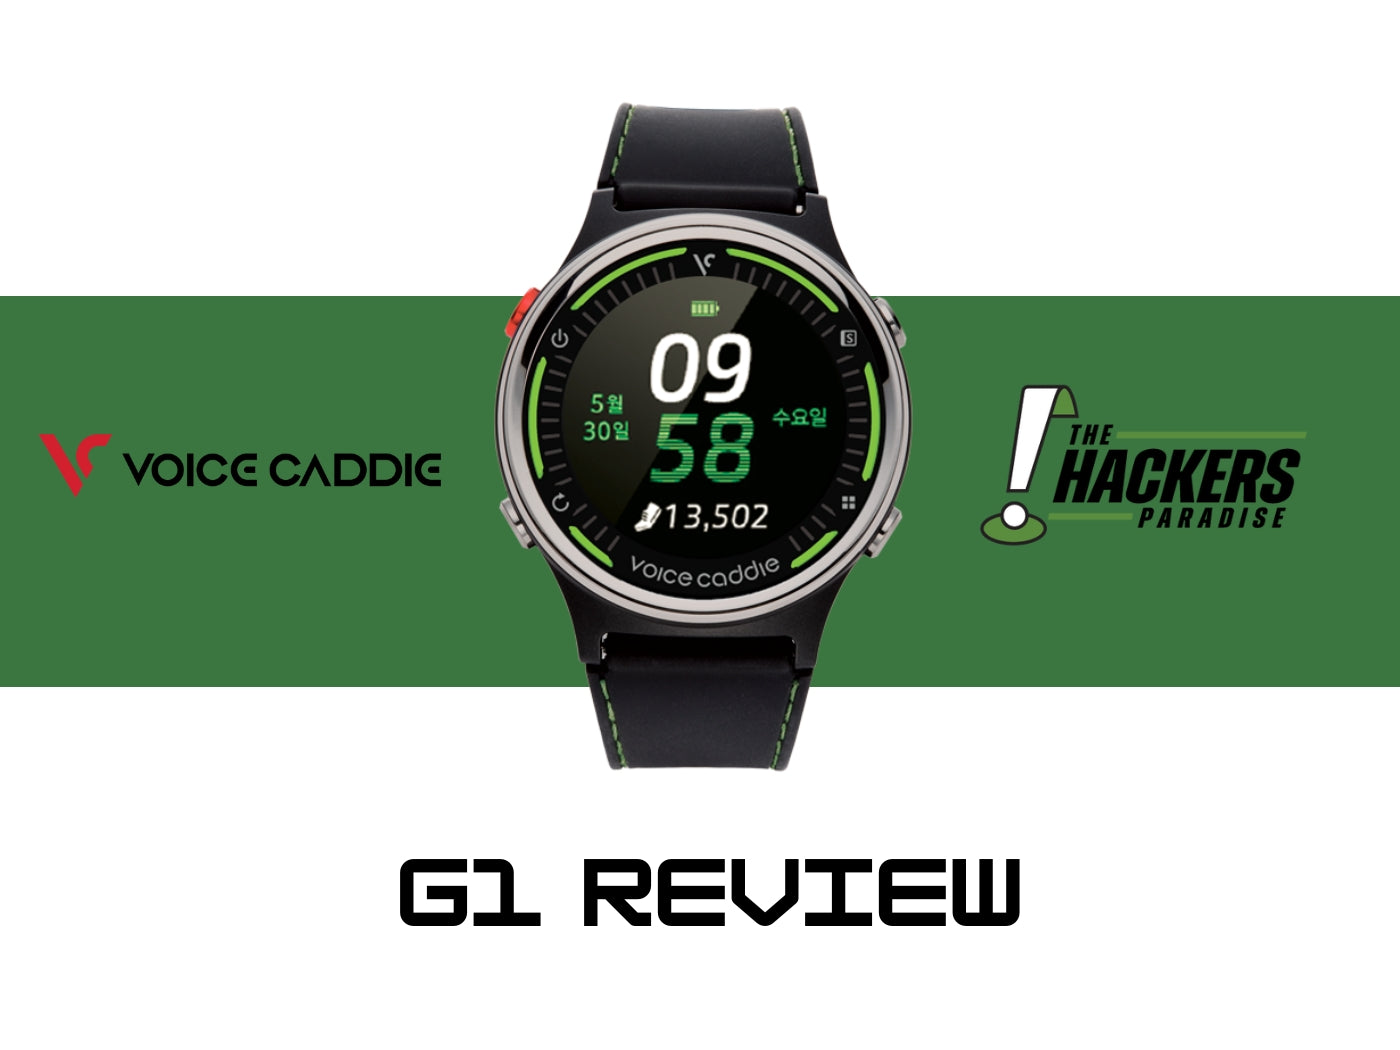 hacker's paradise review of voice caddie G1 gps watch